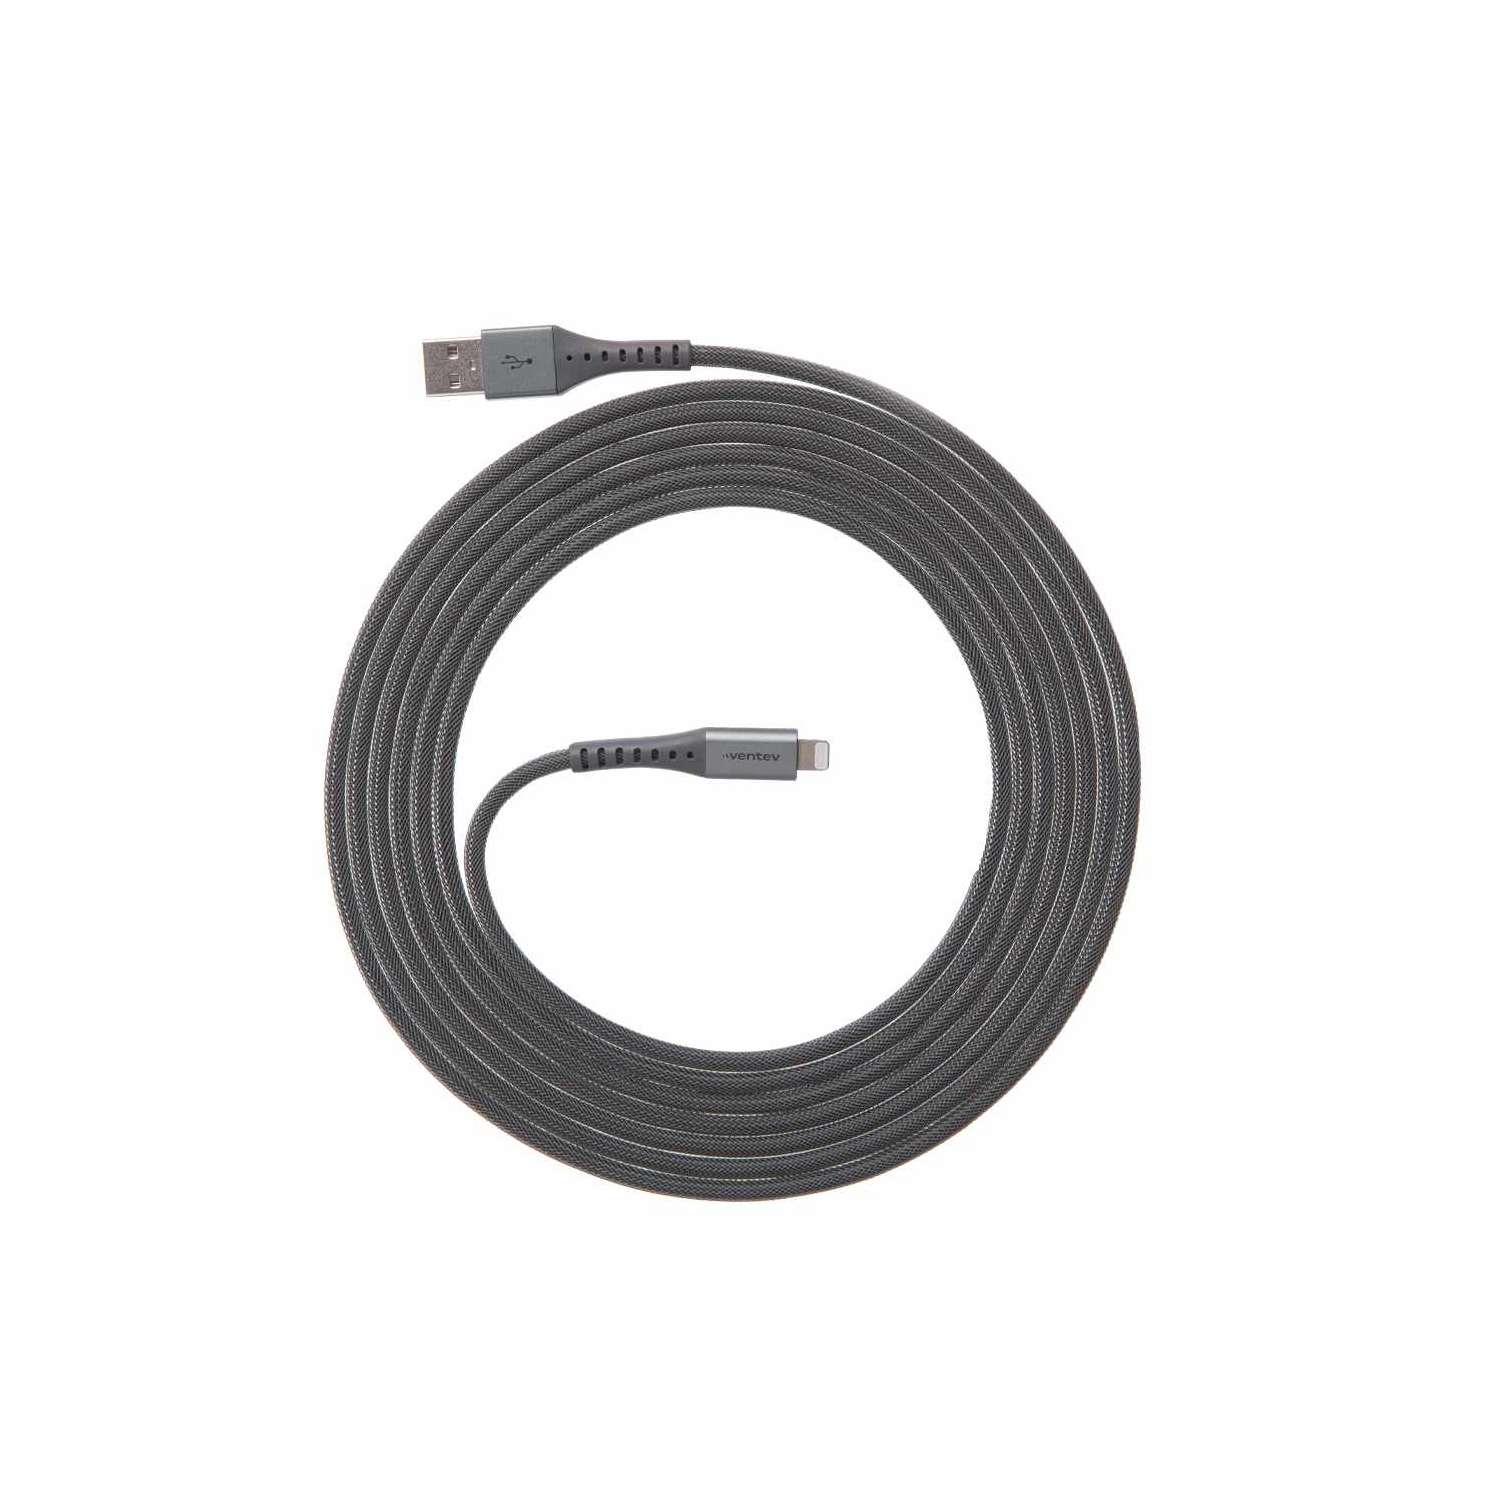 Ventev ChargeSync Alloy Lightning Cable 10ft Steel